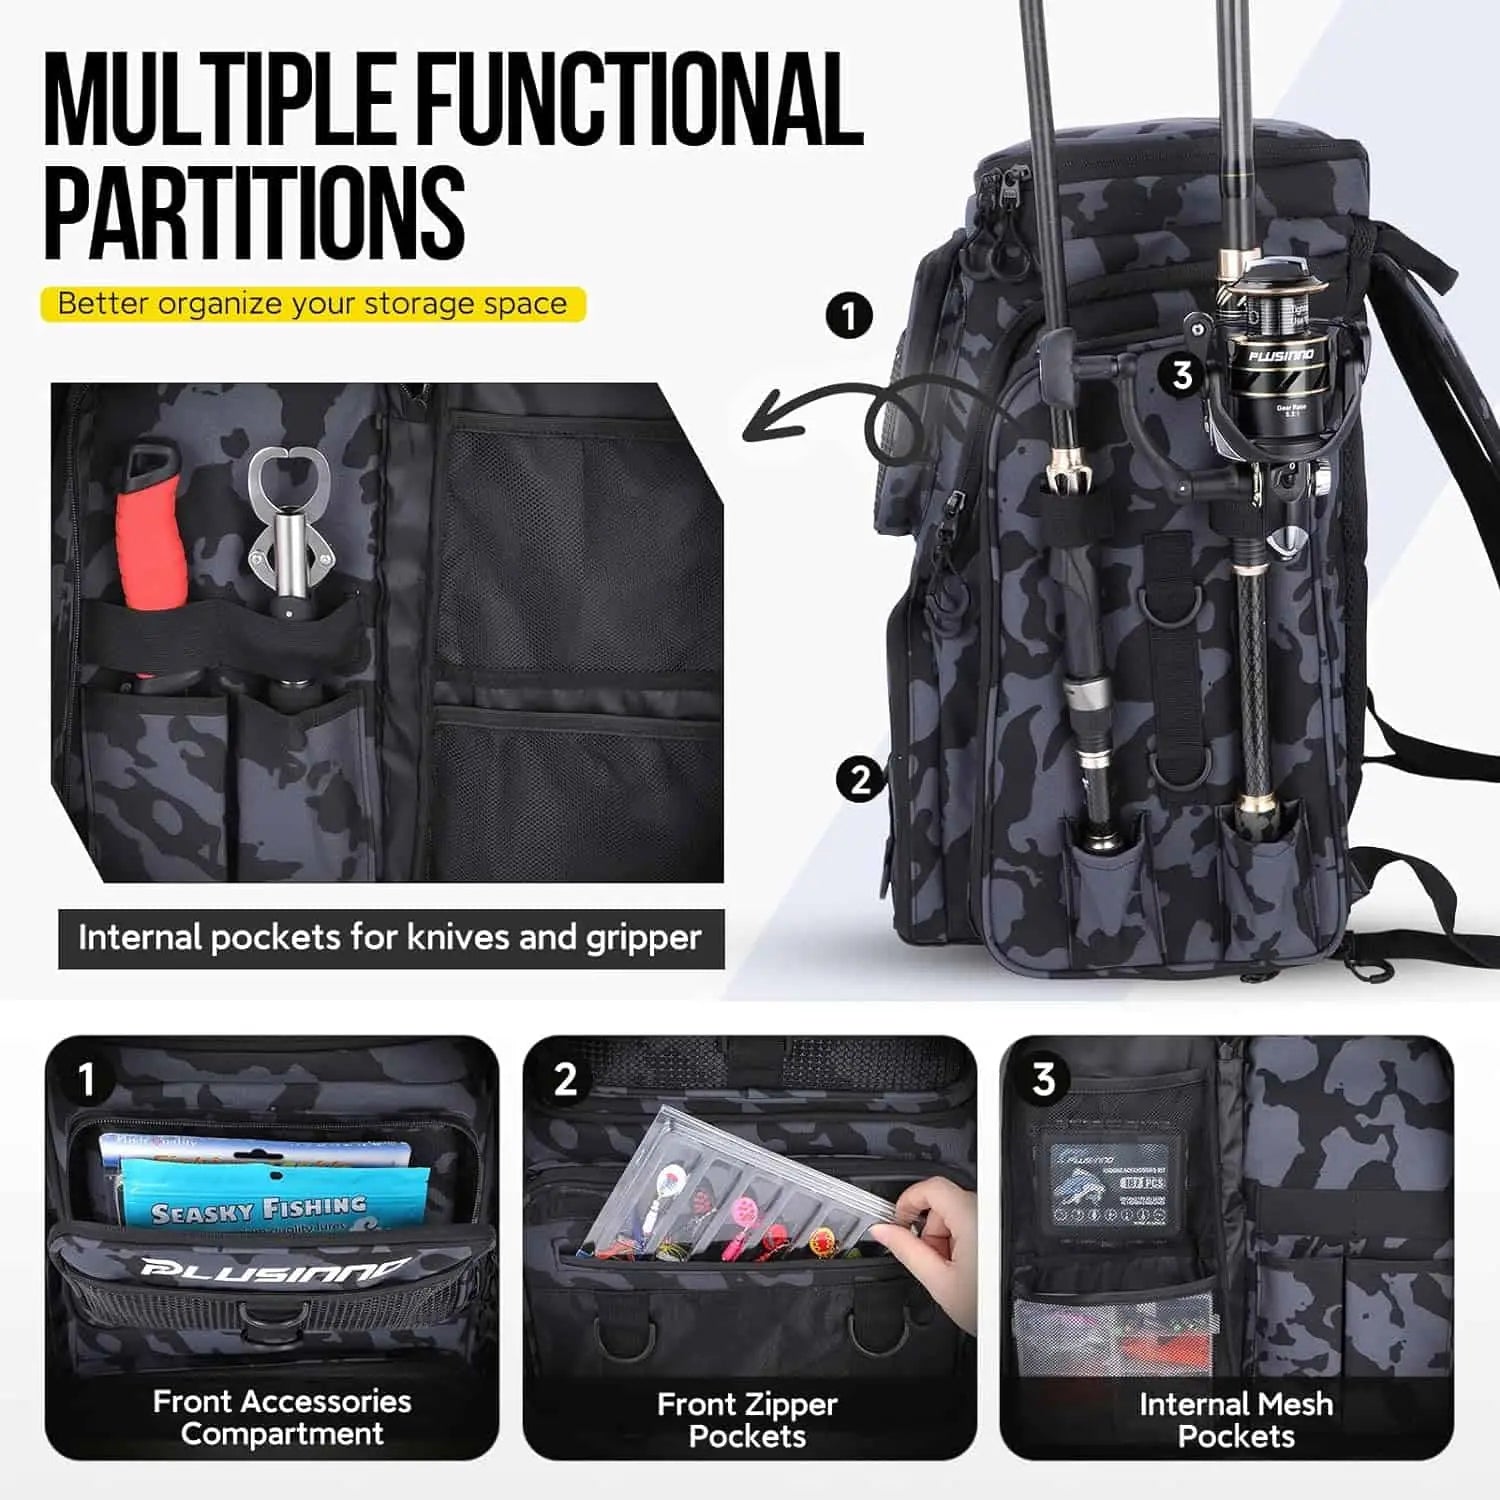 PLUSINNO Water-resistant Large Storage Fishing Tackle Bag with Rod Holders